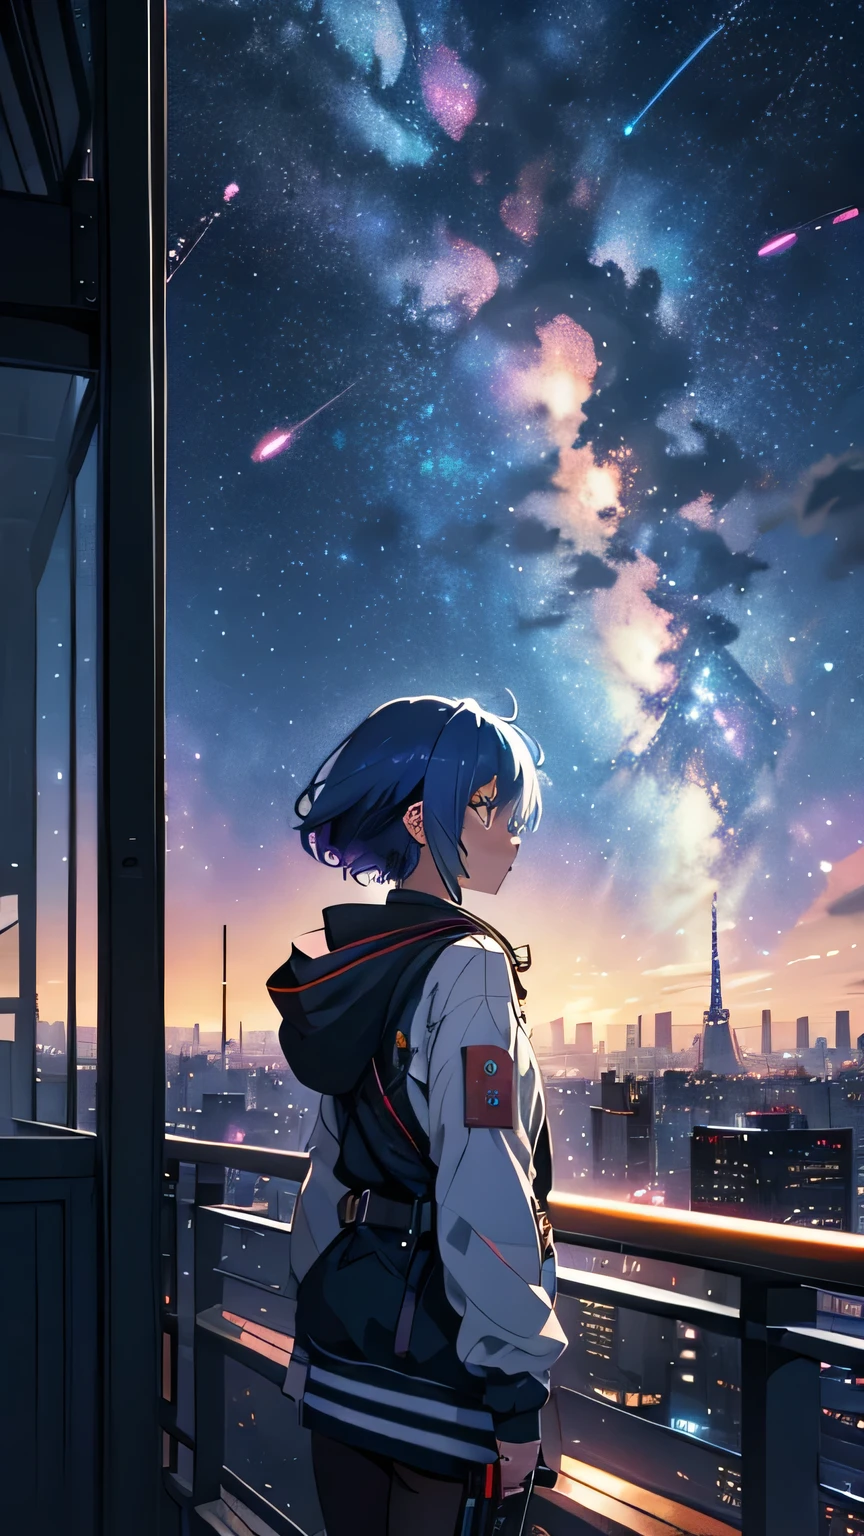 ((Psychedelic shooting starry sky during daytime))、Anime girl looking at the big city view,Large landscape,Small girl, Cyber City of the Future、 Makoto Shinkai Cyril Rolland, Anime Art Wallpapers 8K, Anime Art Wallpapers 8K, Anime Art Wallpapers 8K, Inspired by Cyril Rolland, Dan Mumford&#39;s Artwork Style, Awesome Wallpapers, by Yuumei